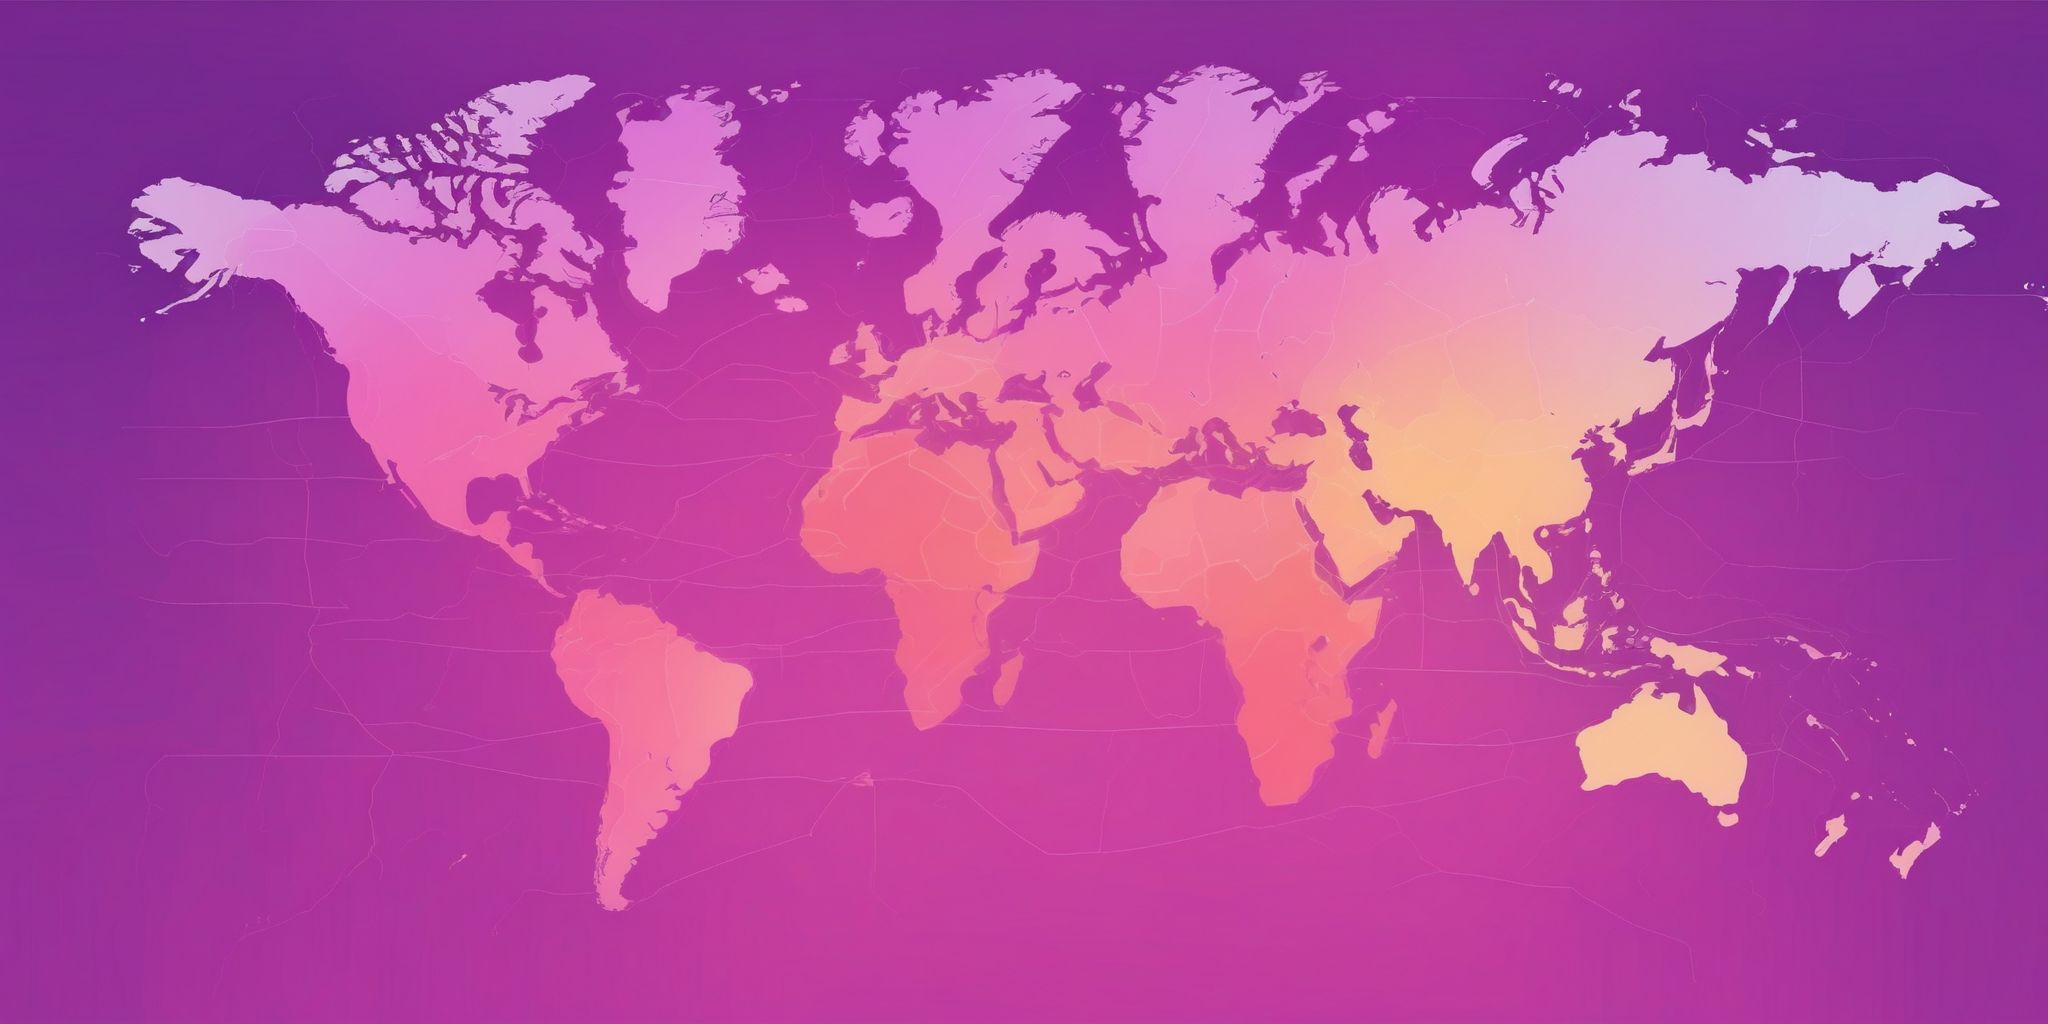 Map in flat illustration style, colorful purple gradient colors